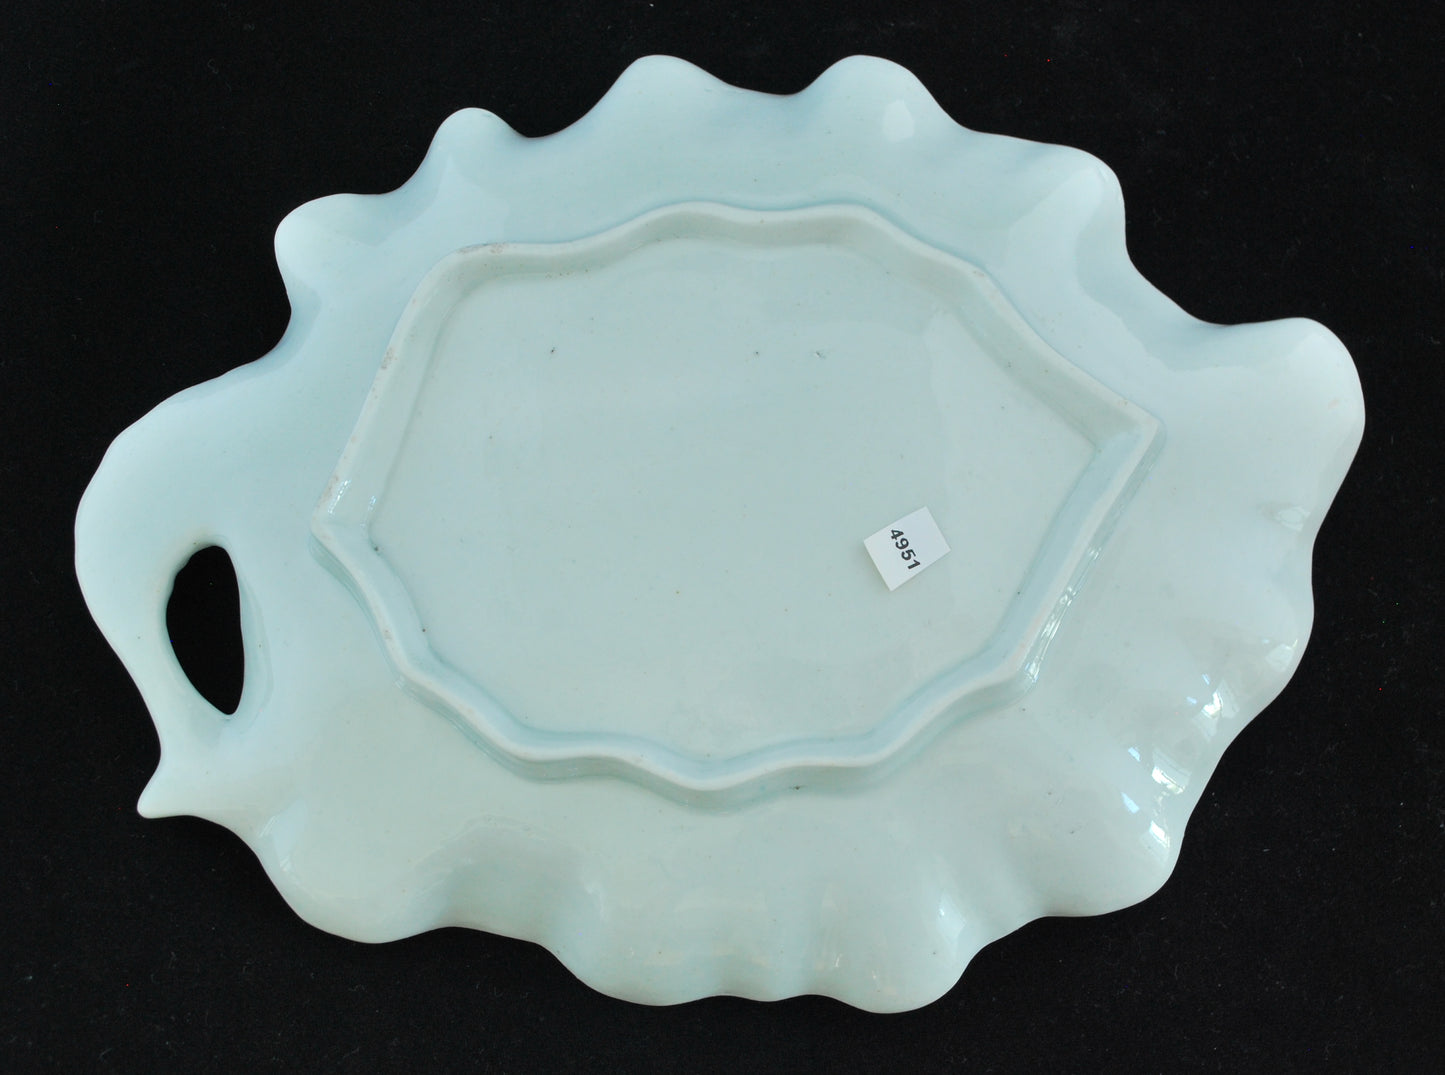 Leaf shape dish, probably Giles decorated